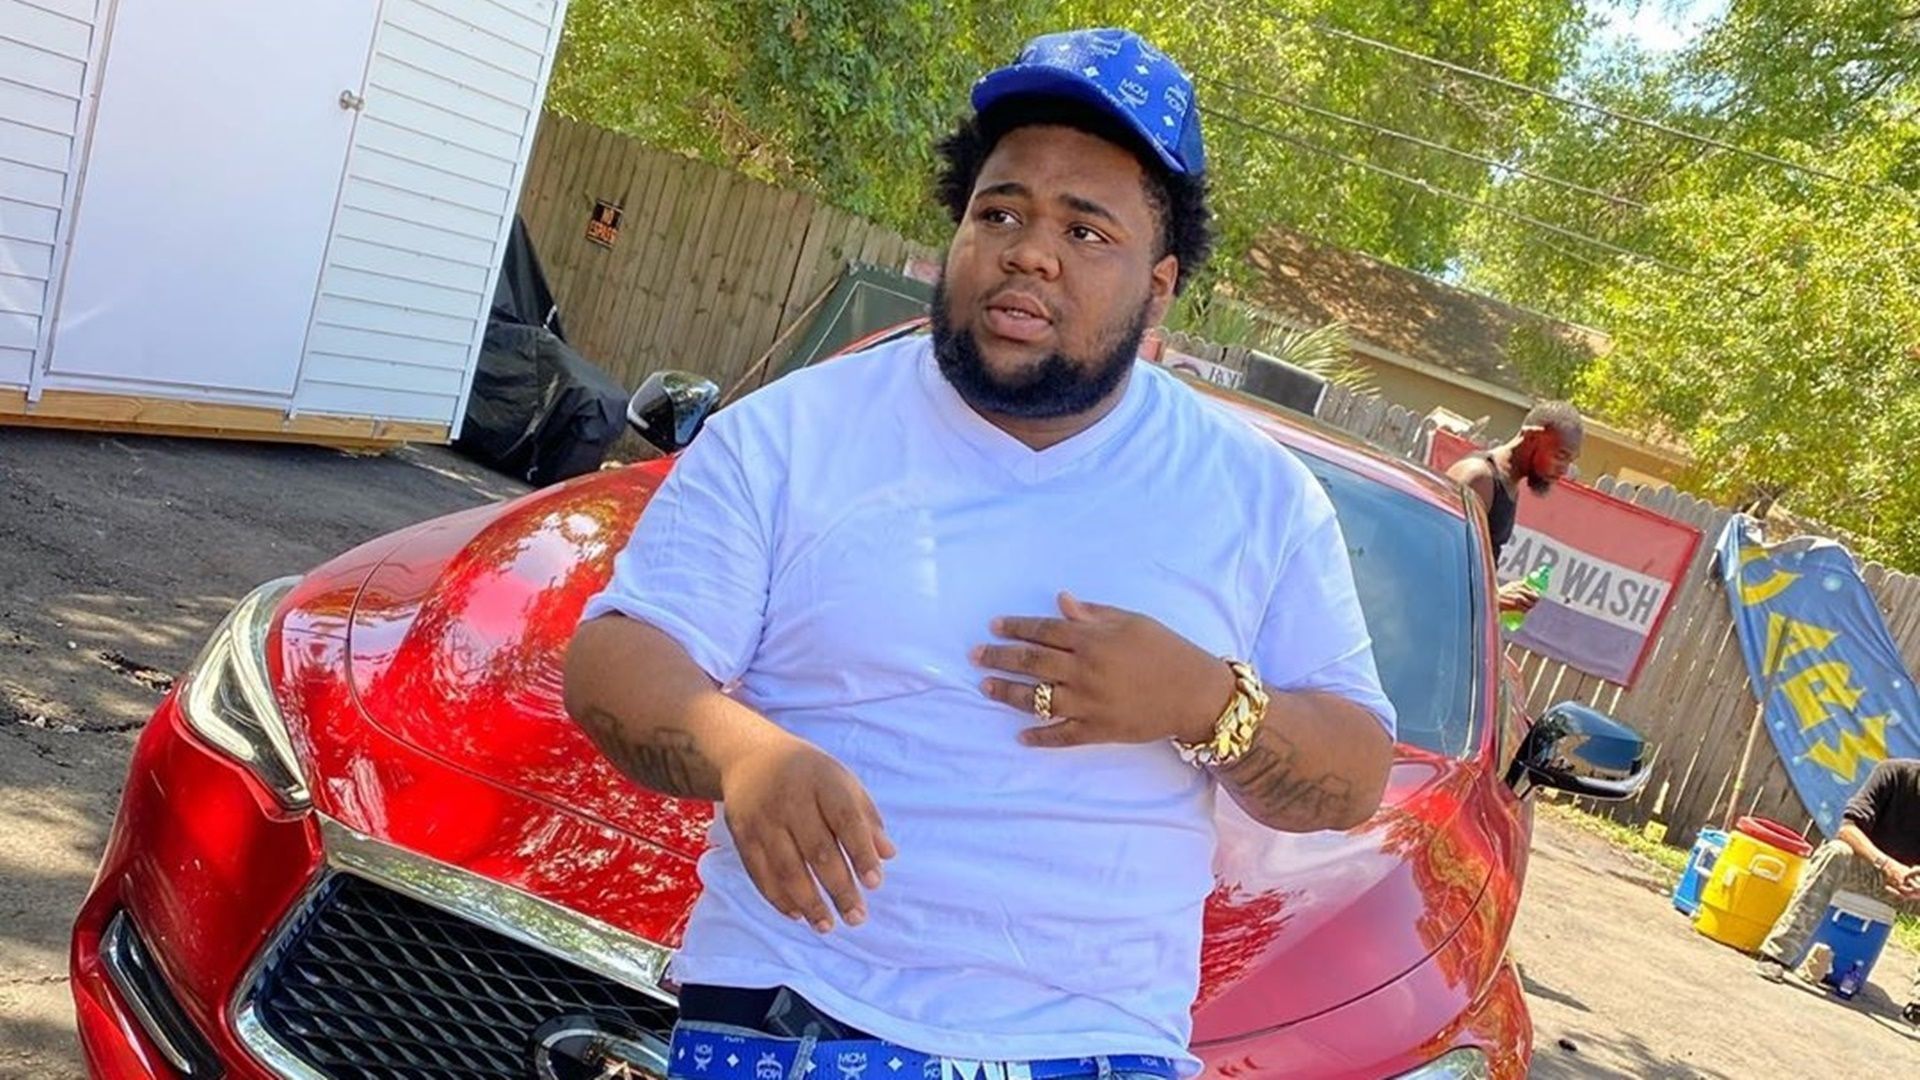 Rapper Mo3, 38, was killed in a shooting in Dallas, Texas, on Tuesday, Oct. 5, 2021. - Rod Wave